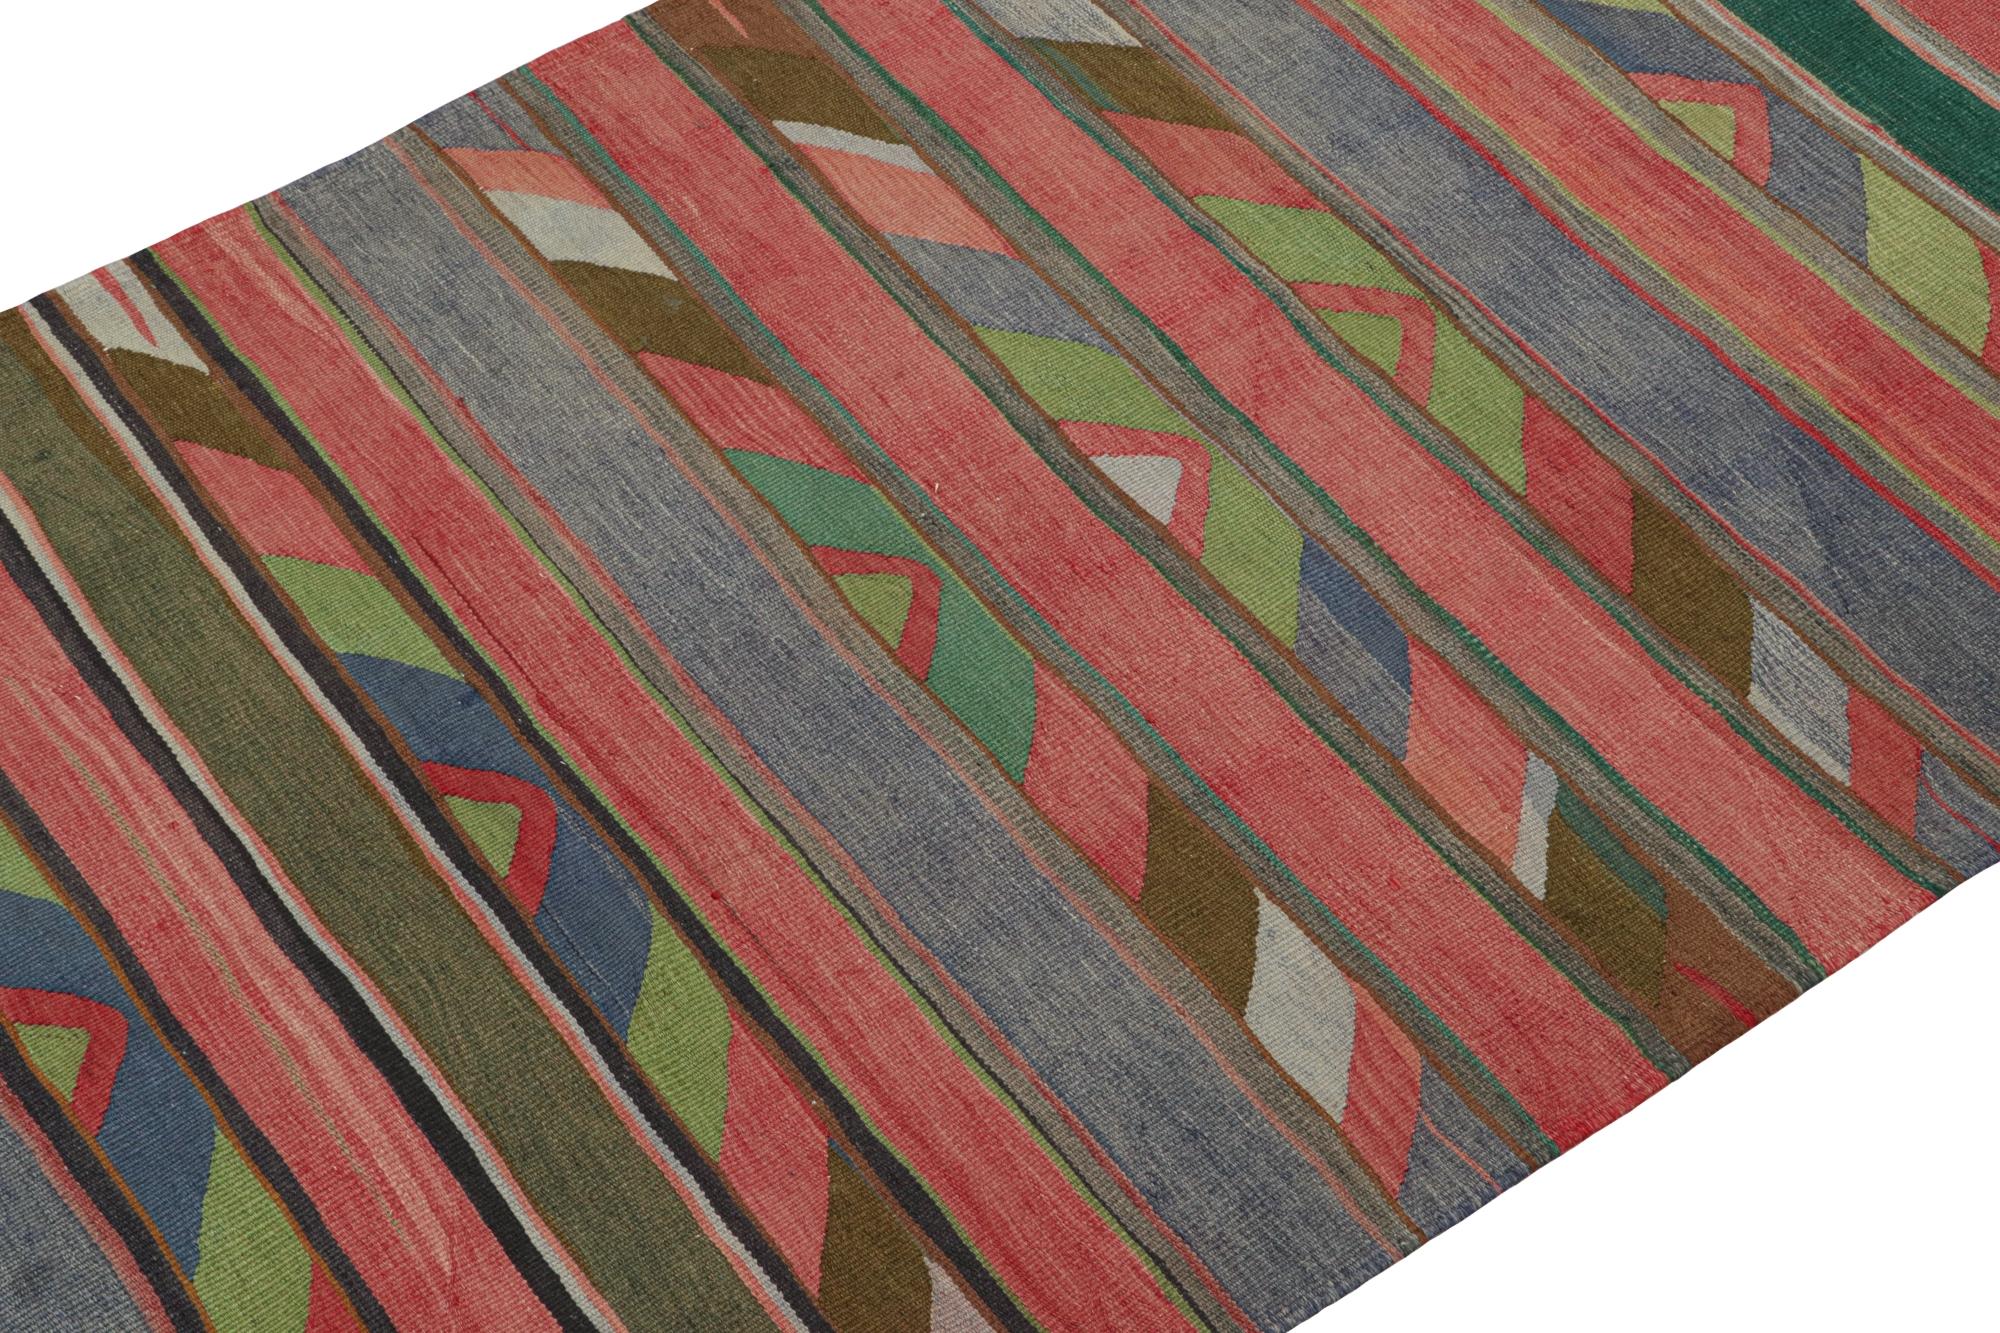 This vintage 5x10 Persian Kilim is a rare Bidjar flatweave and tribal rug, handwoven in wool circa 1950-1960.

On the Design: 

This particular Bidjar Kilim marks a creative employ of a minimal palette in its use of reds, blues, and greens. Keen